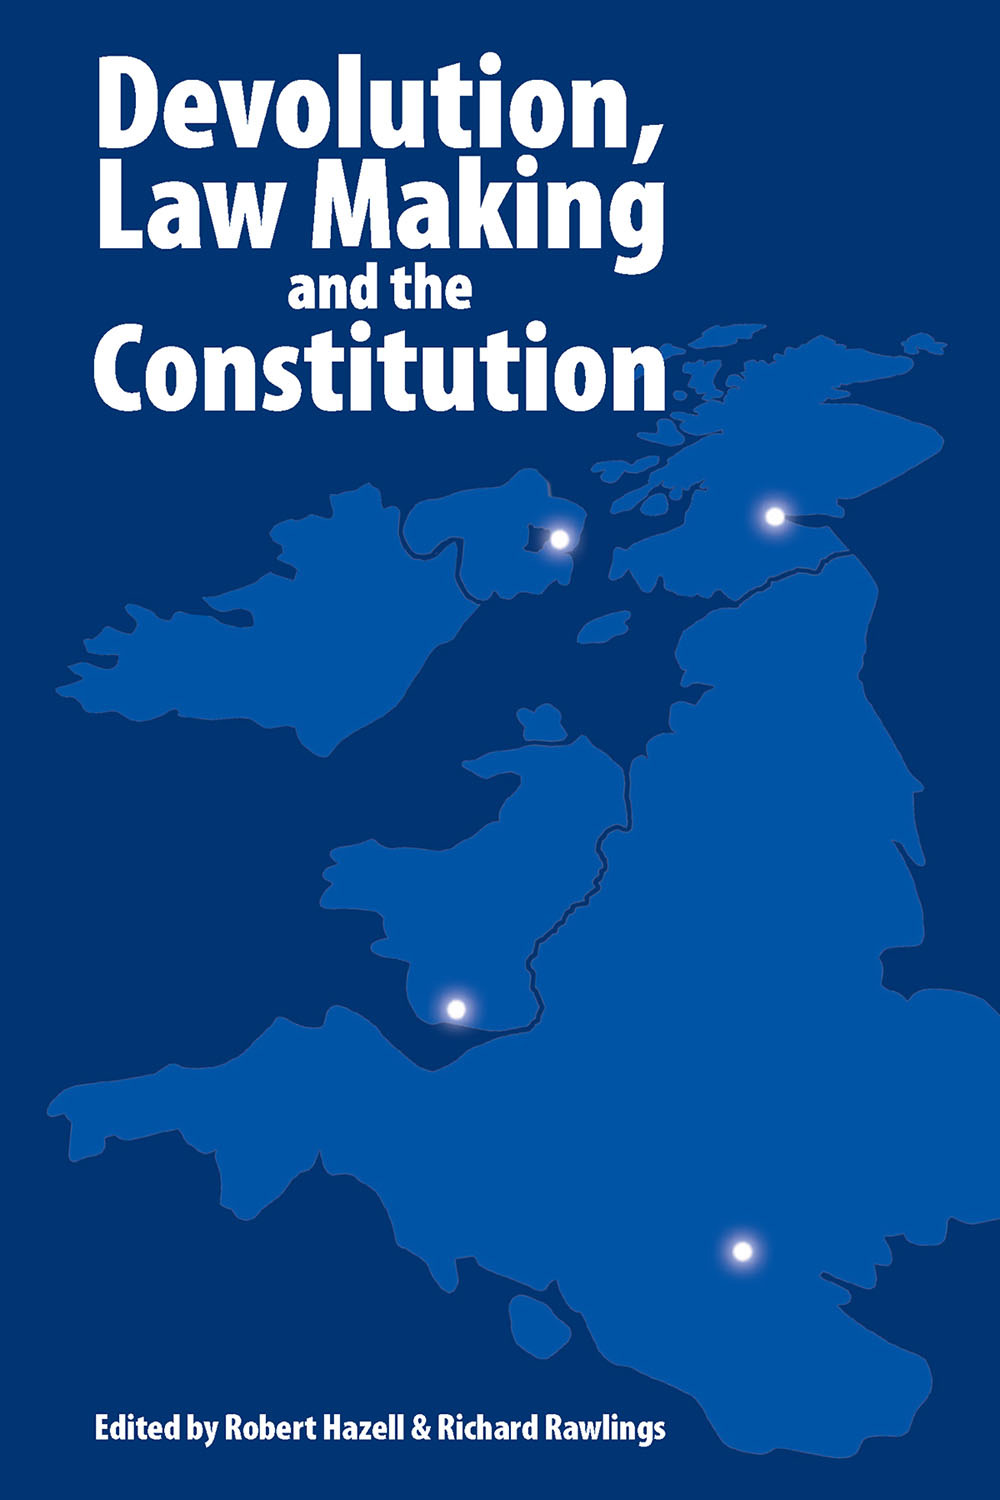 Hazell, Robert - Devolution, Law Making and the Constitution, ebook